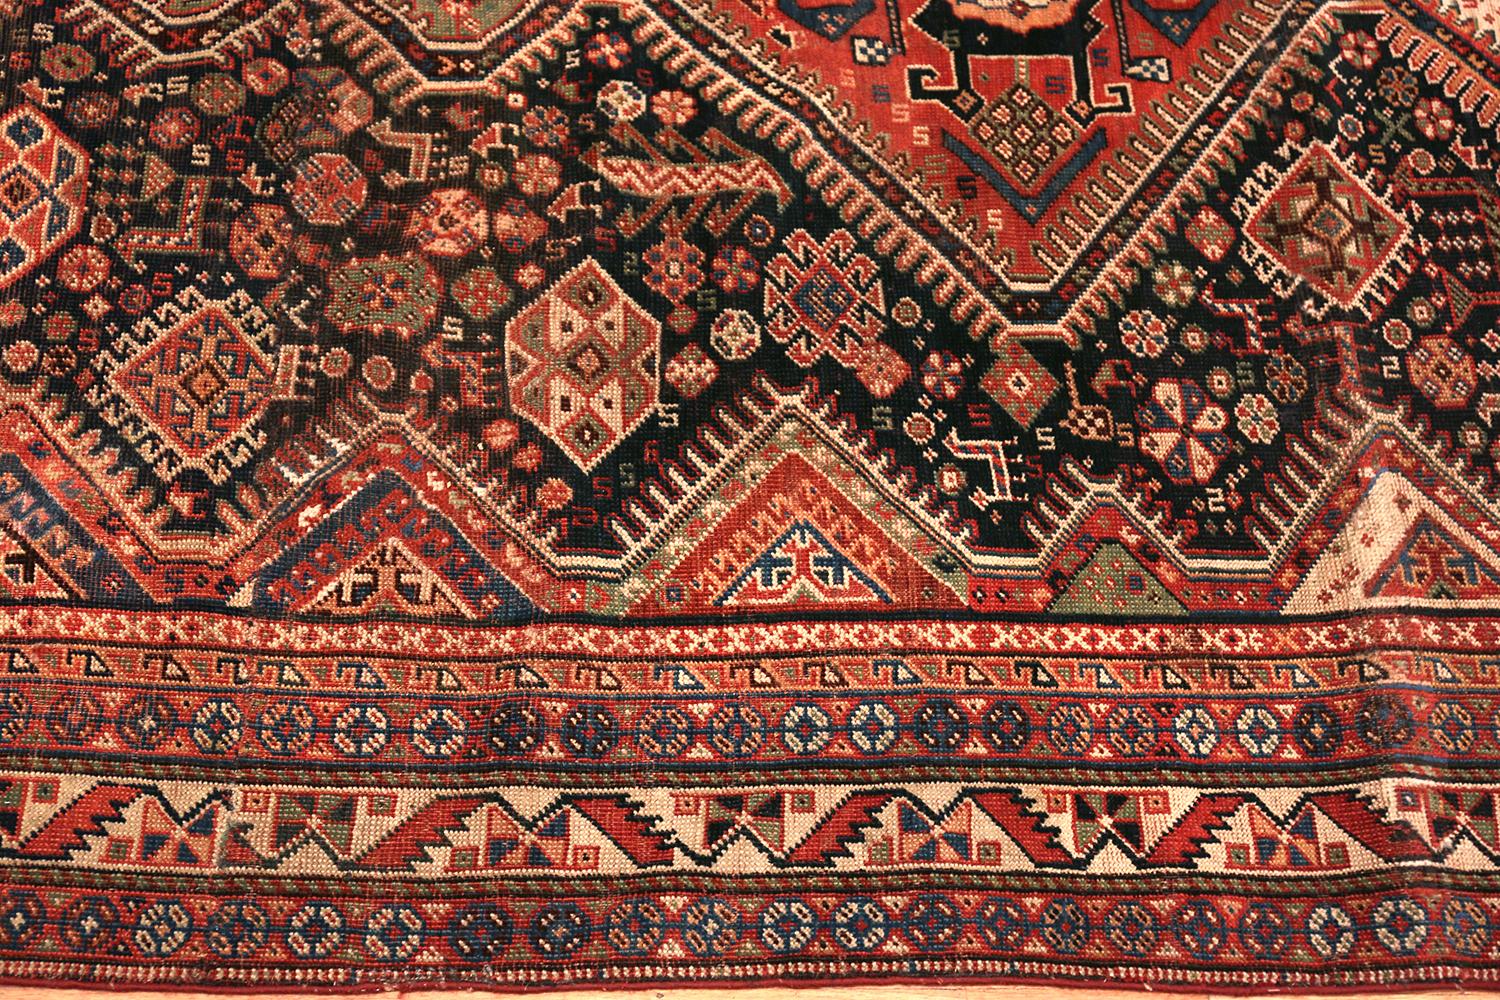 A beautifully Tribal antique Persian Qashqai rug, country of origin / Rug type: antique Persian rugs, date circa 1920.

Size: 4 ft 10 in x 7 ft 5 in (1.47 m x 2.26 m).